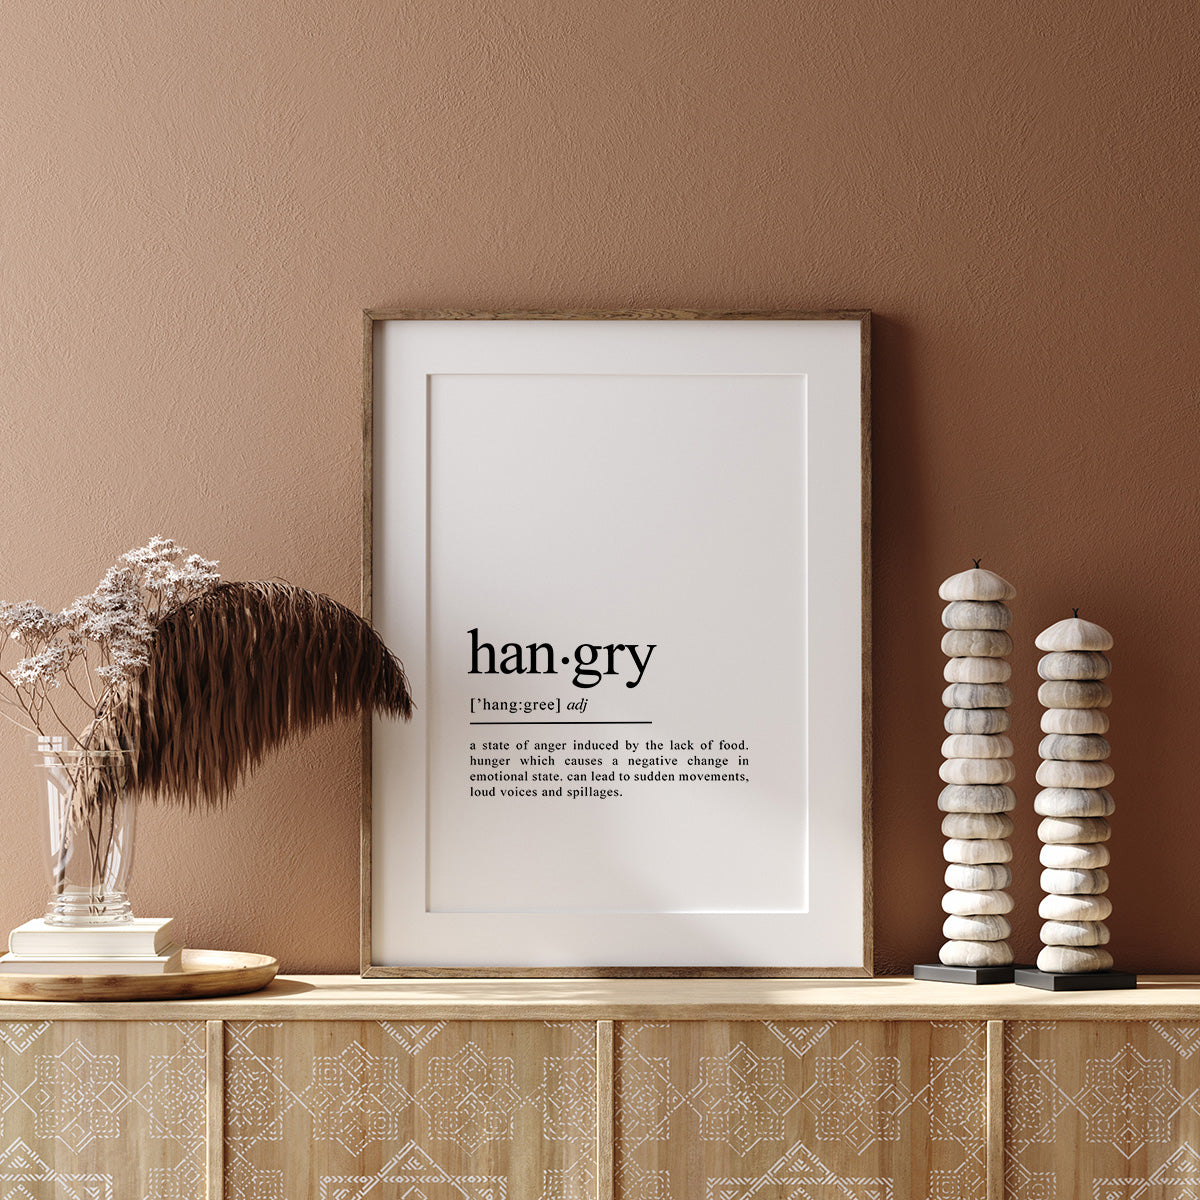 hangry definition print